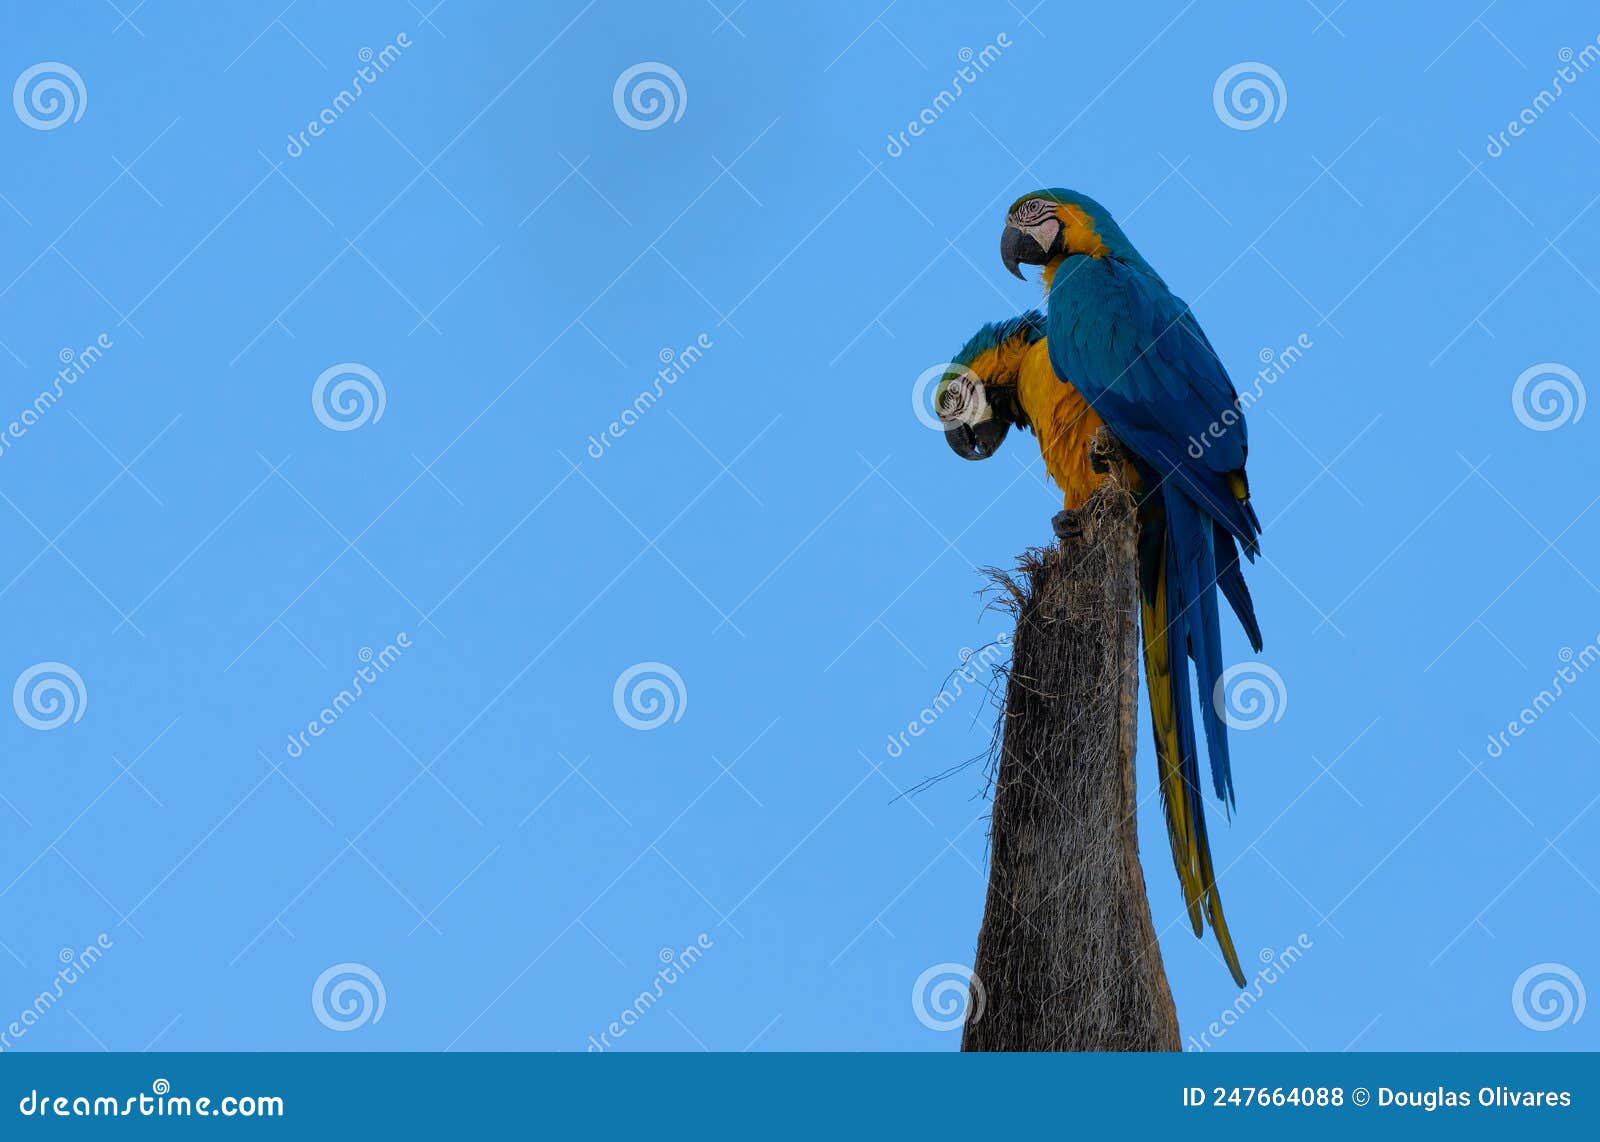 colorful parrots commonly known as guacamayo azuliamarillo perched on a tree